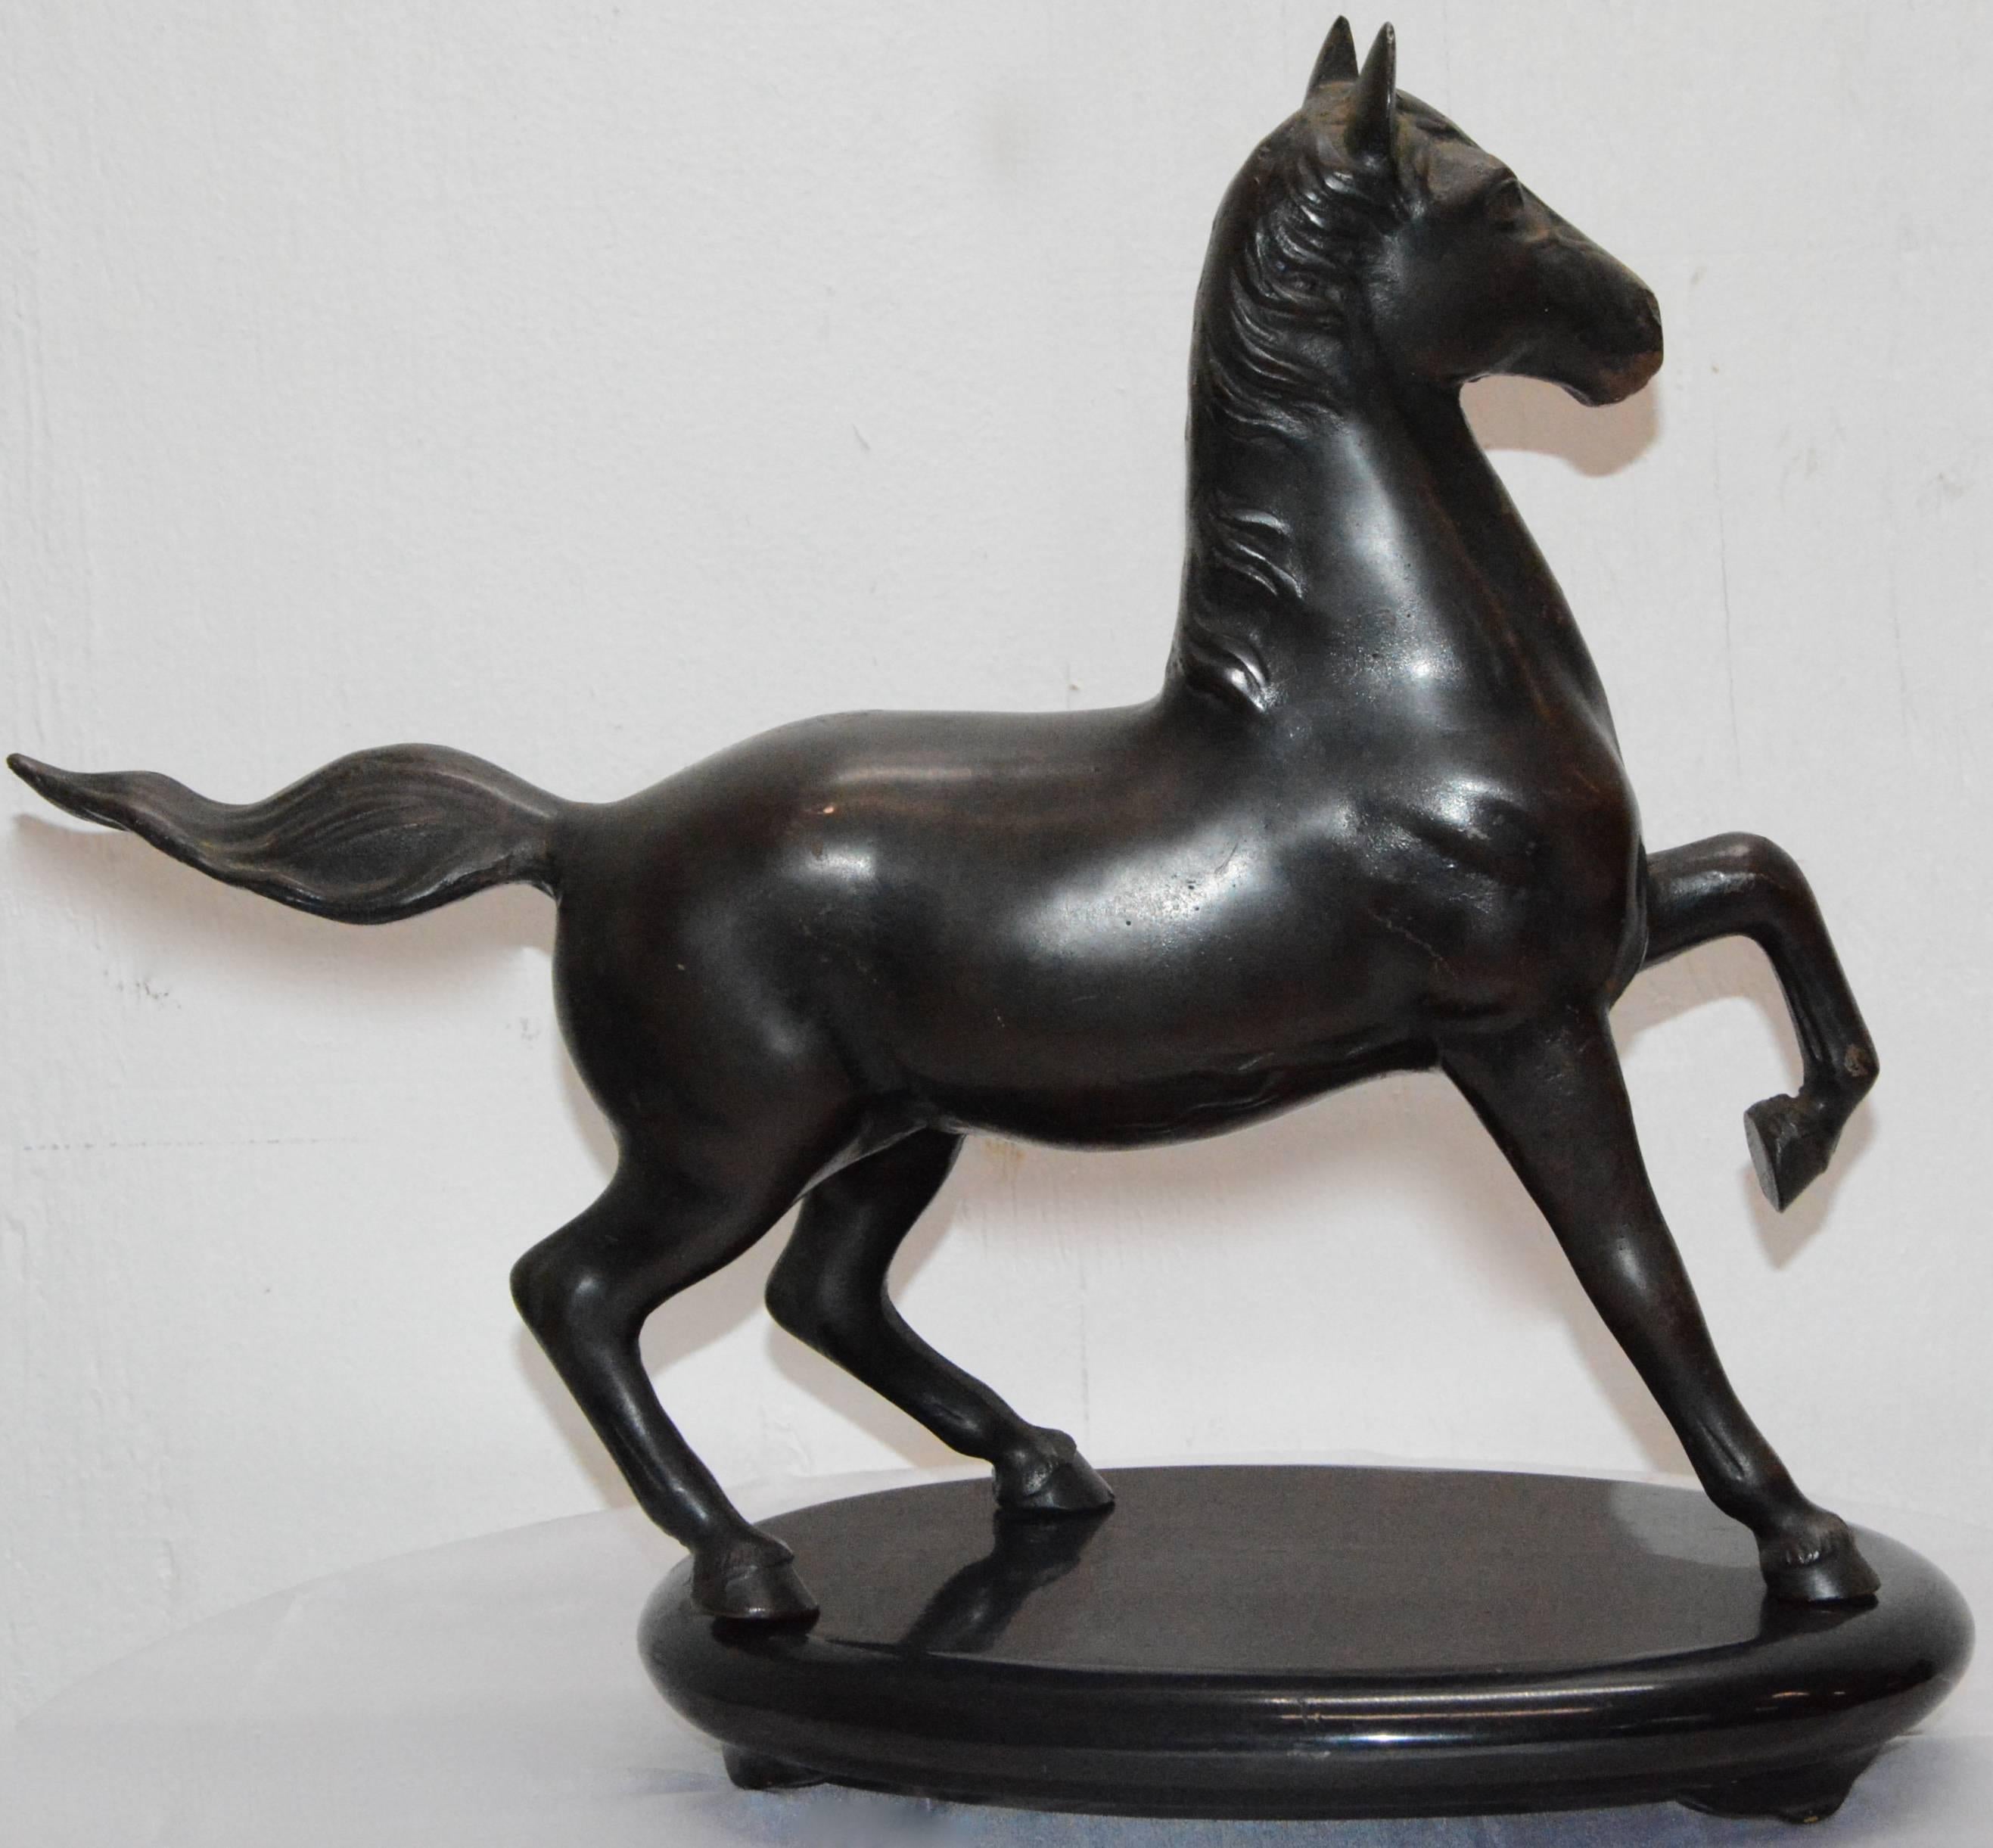 This is a high stepping horse that is made of cast iron and finished off with bronze polychrome. He sits atop a black lacquer stand.